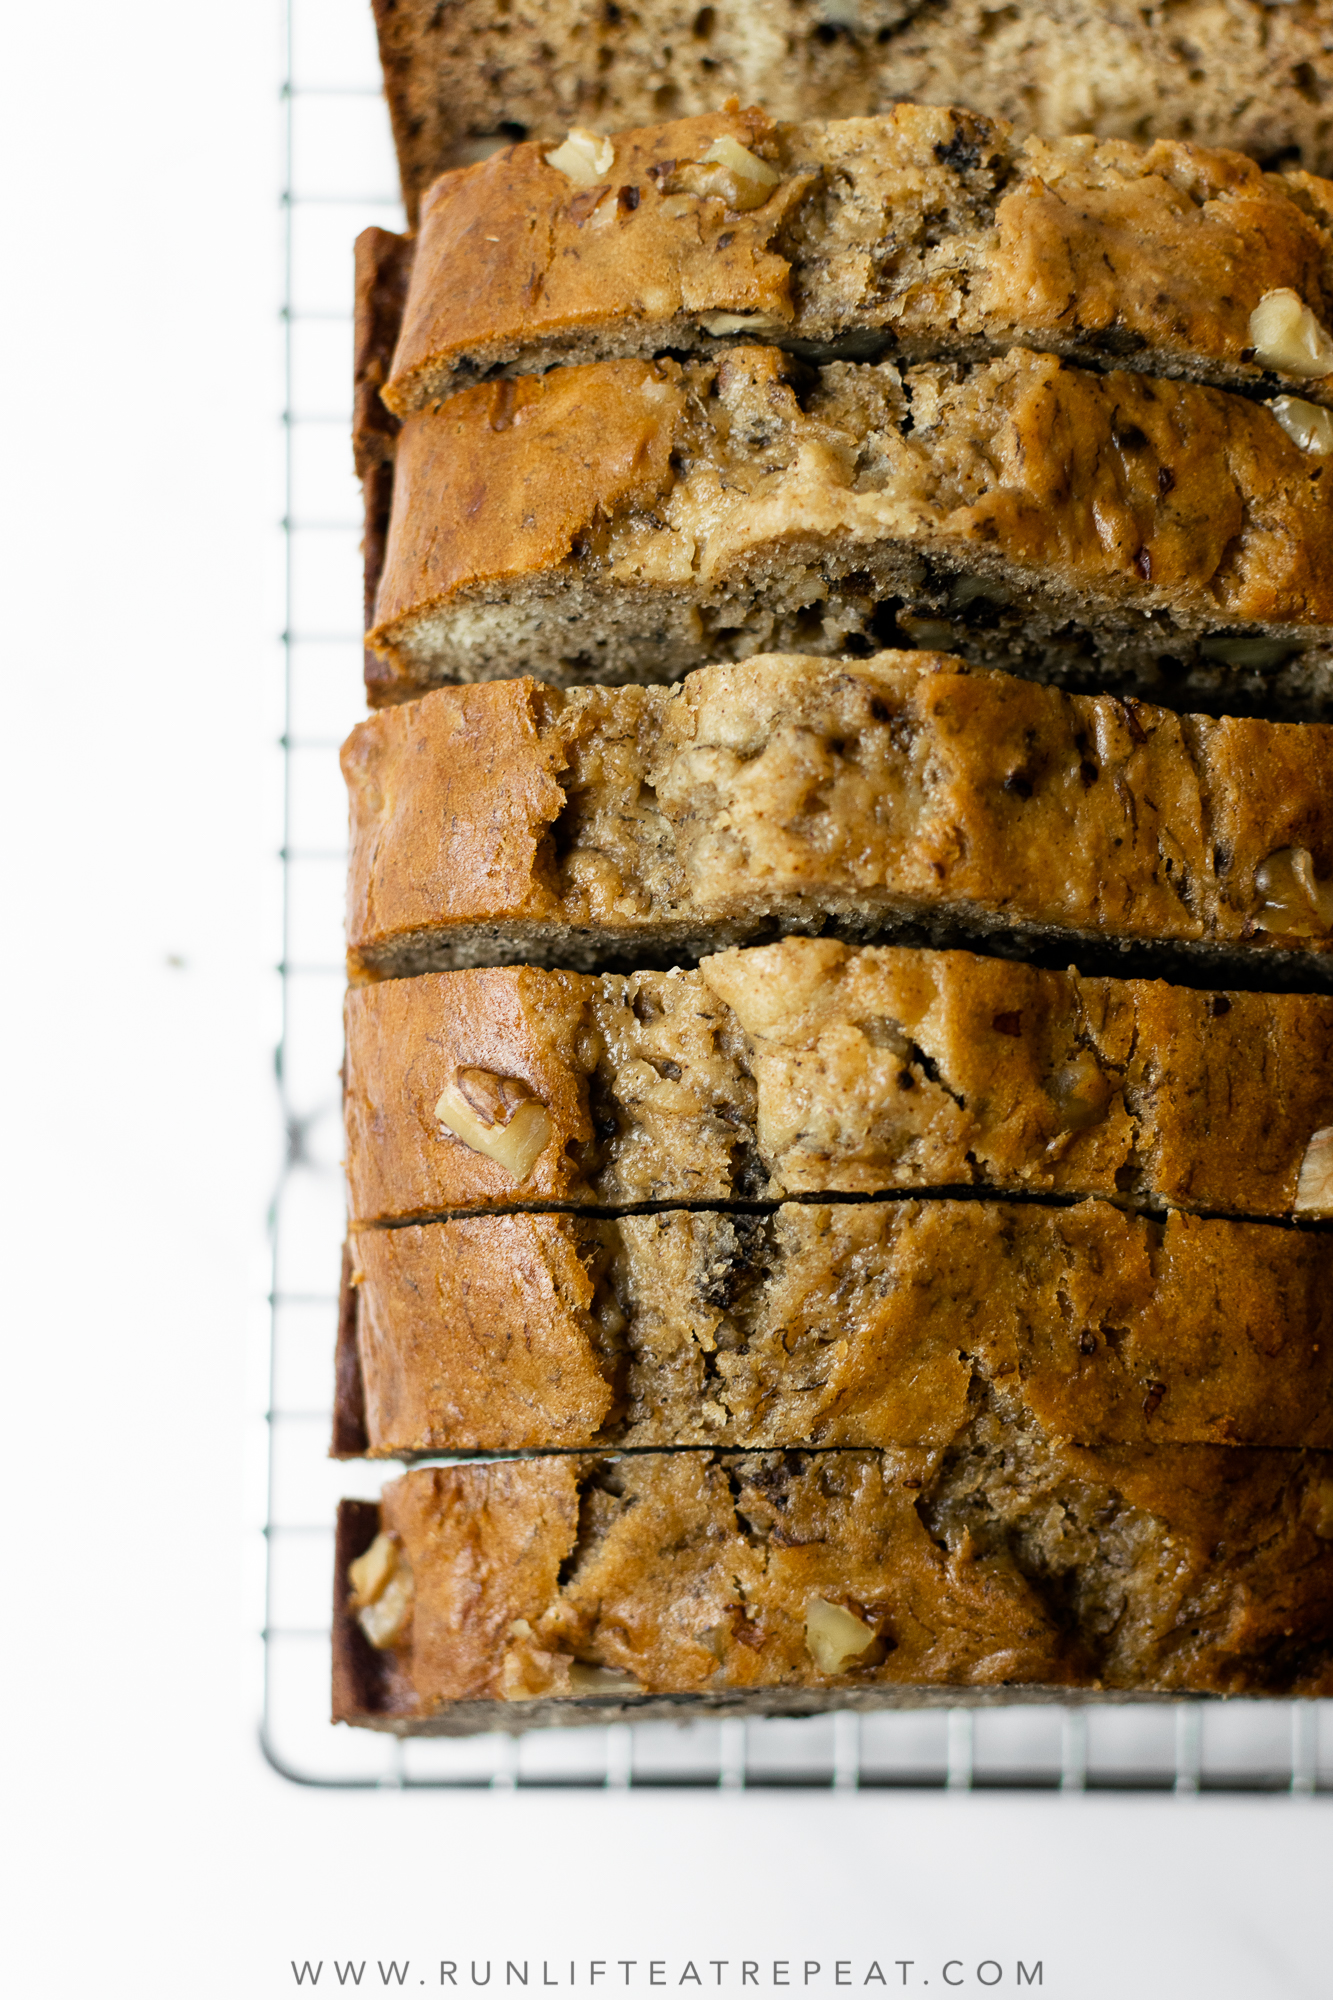 This has been my go-to banana bread recipe for years— with its moist texture, buttery flavor, and incredibly soft crumb, this is truly the best banana recipe that you'll ever have!